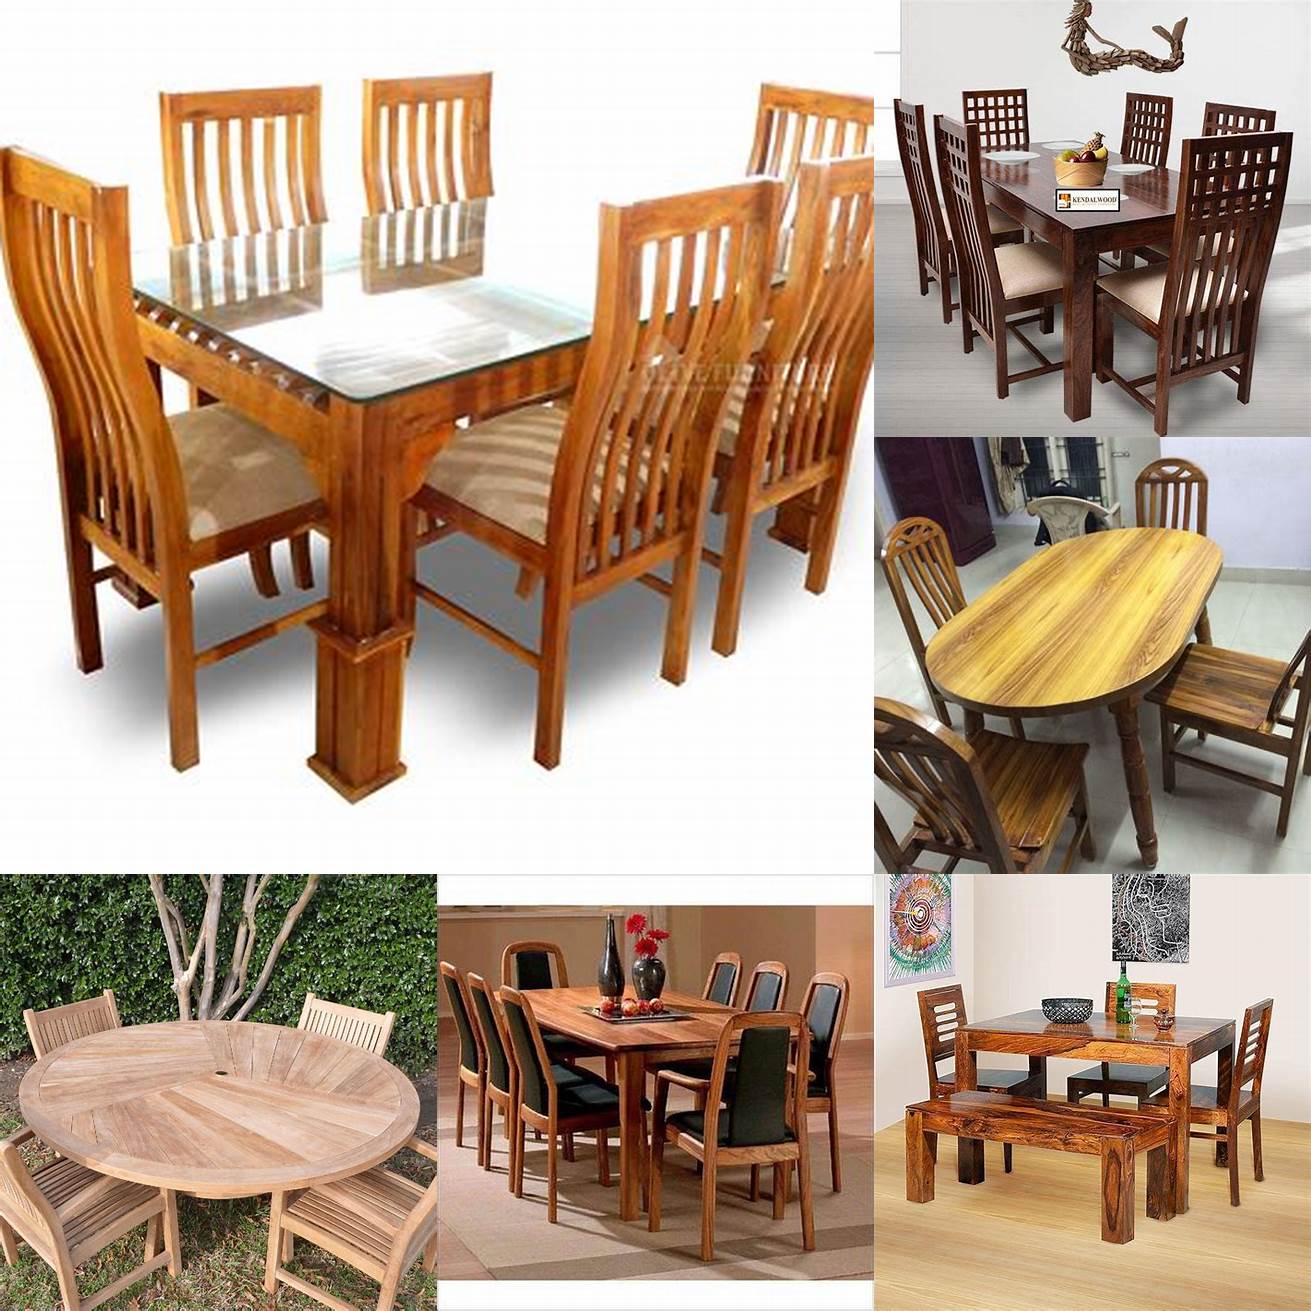 Teak Wood Dining Table in Different Angles